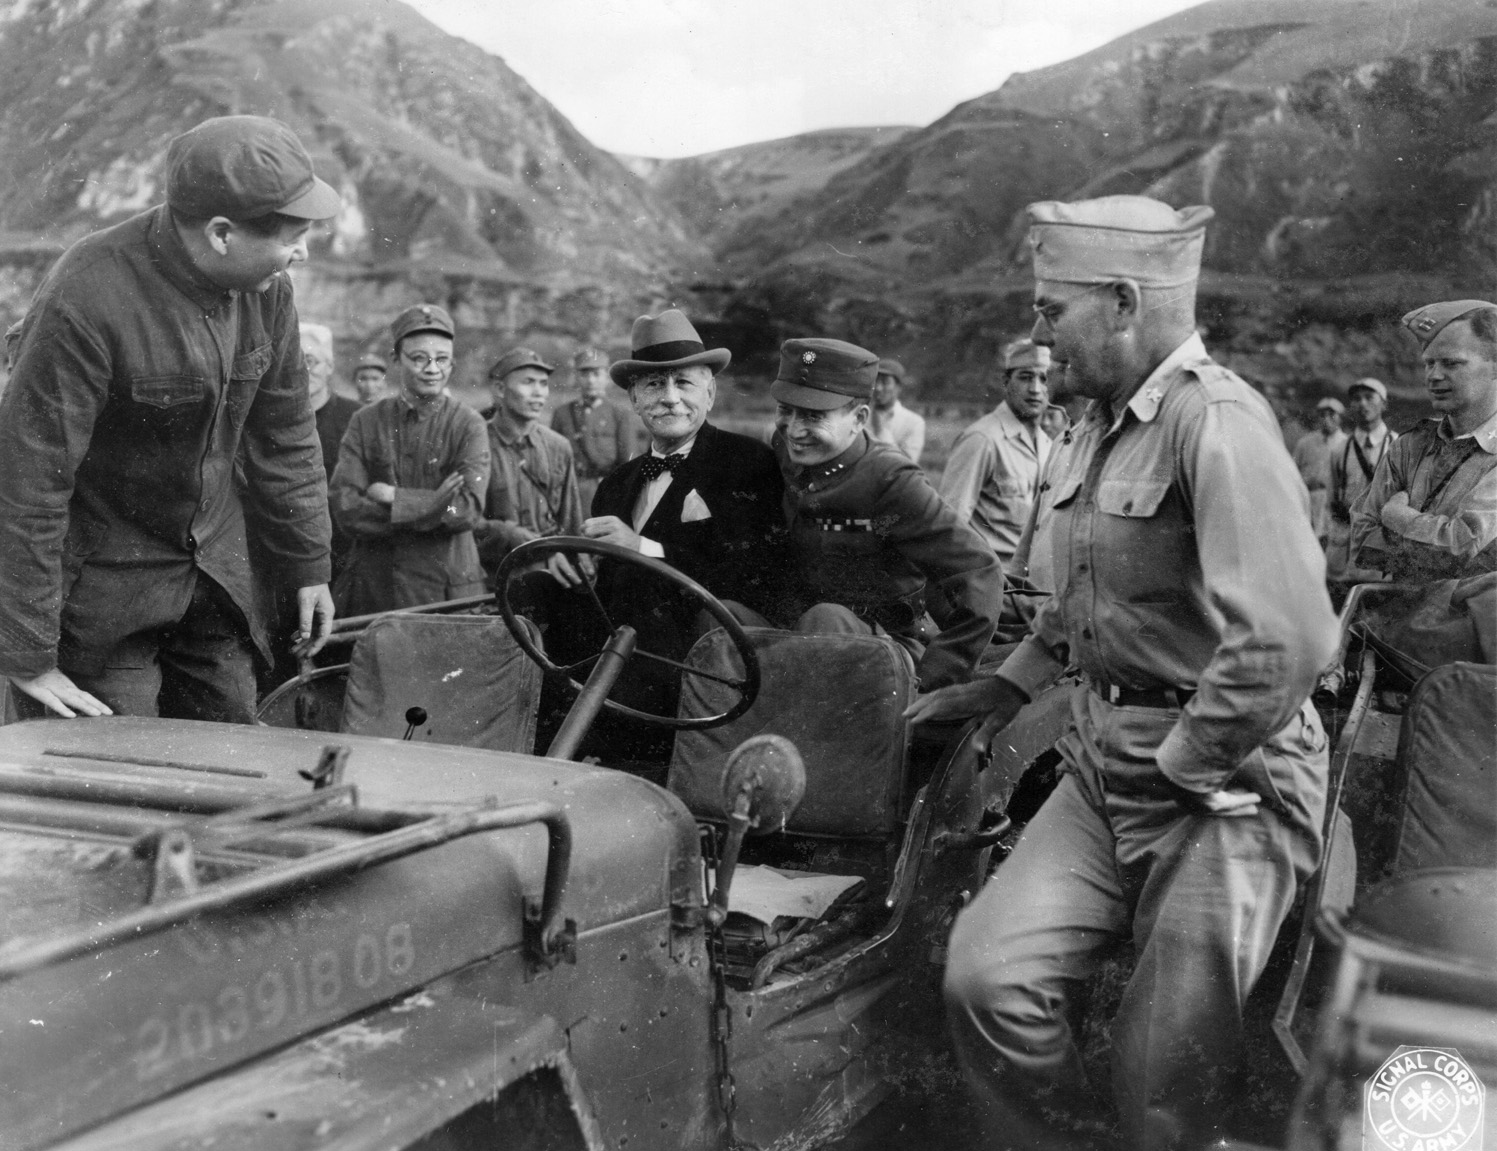 During a meeting in China in 1945, Communist leader Mao Tse-tung climbs aboard a Jeep that is carrying U.S. Ambassador Patrick Hurley and American Colonel I.V. Yeaton. 